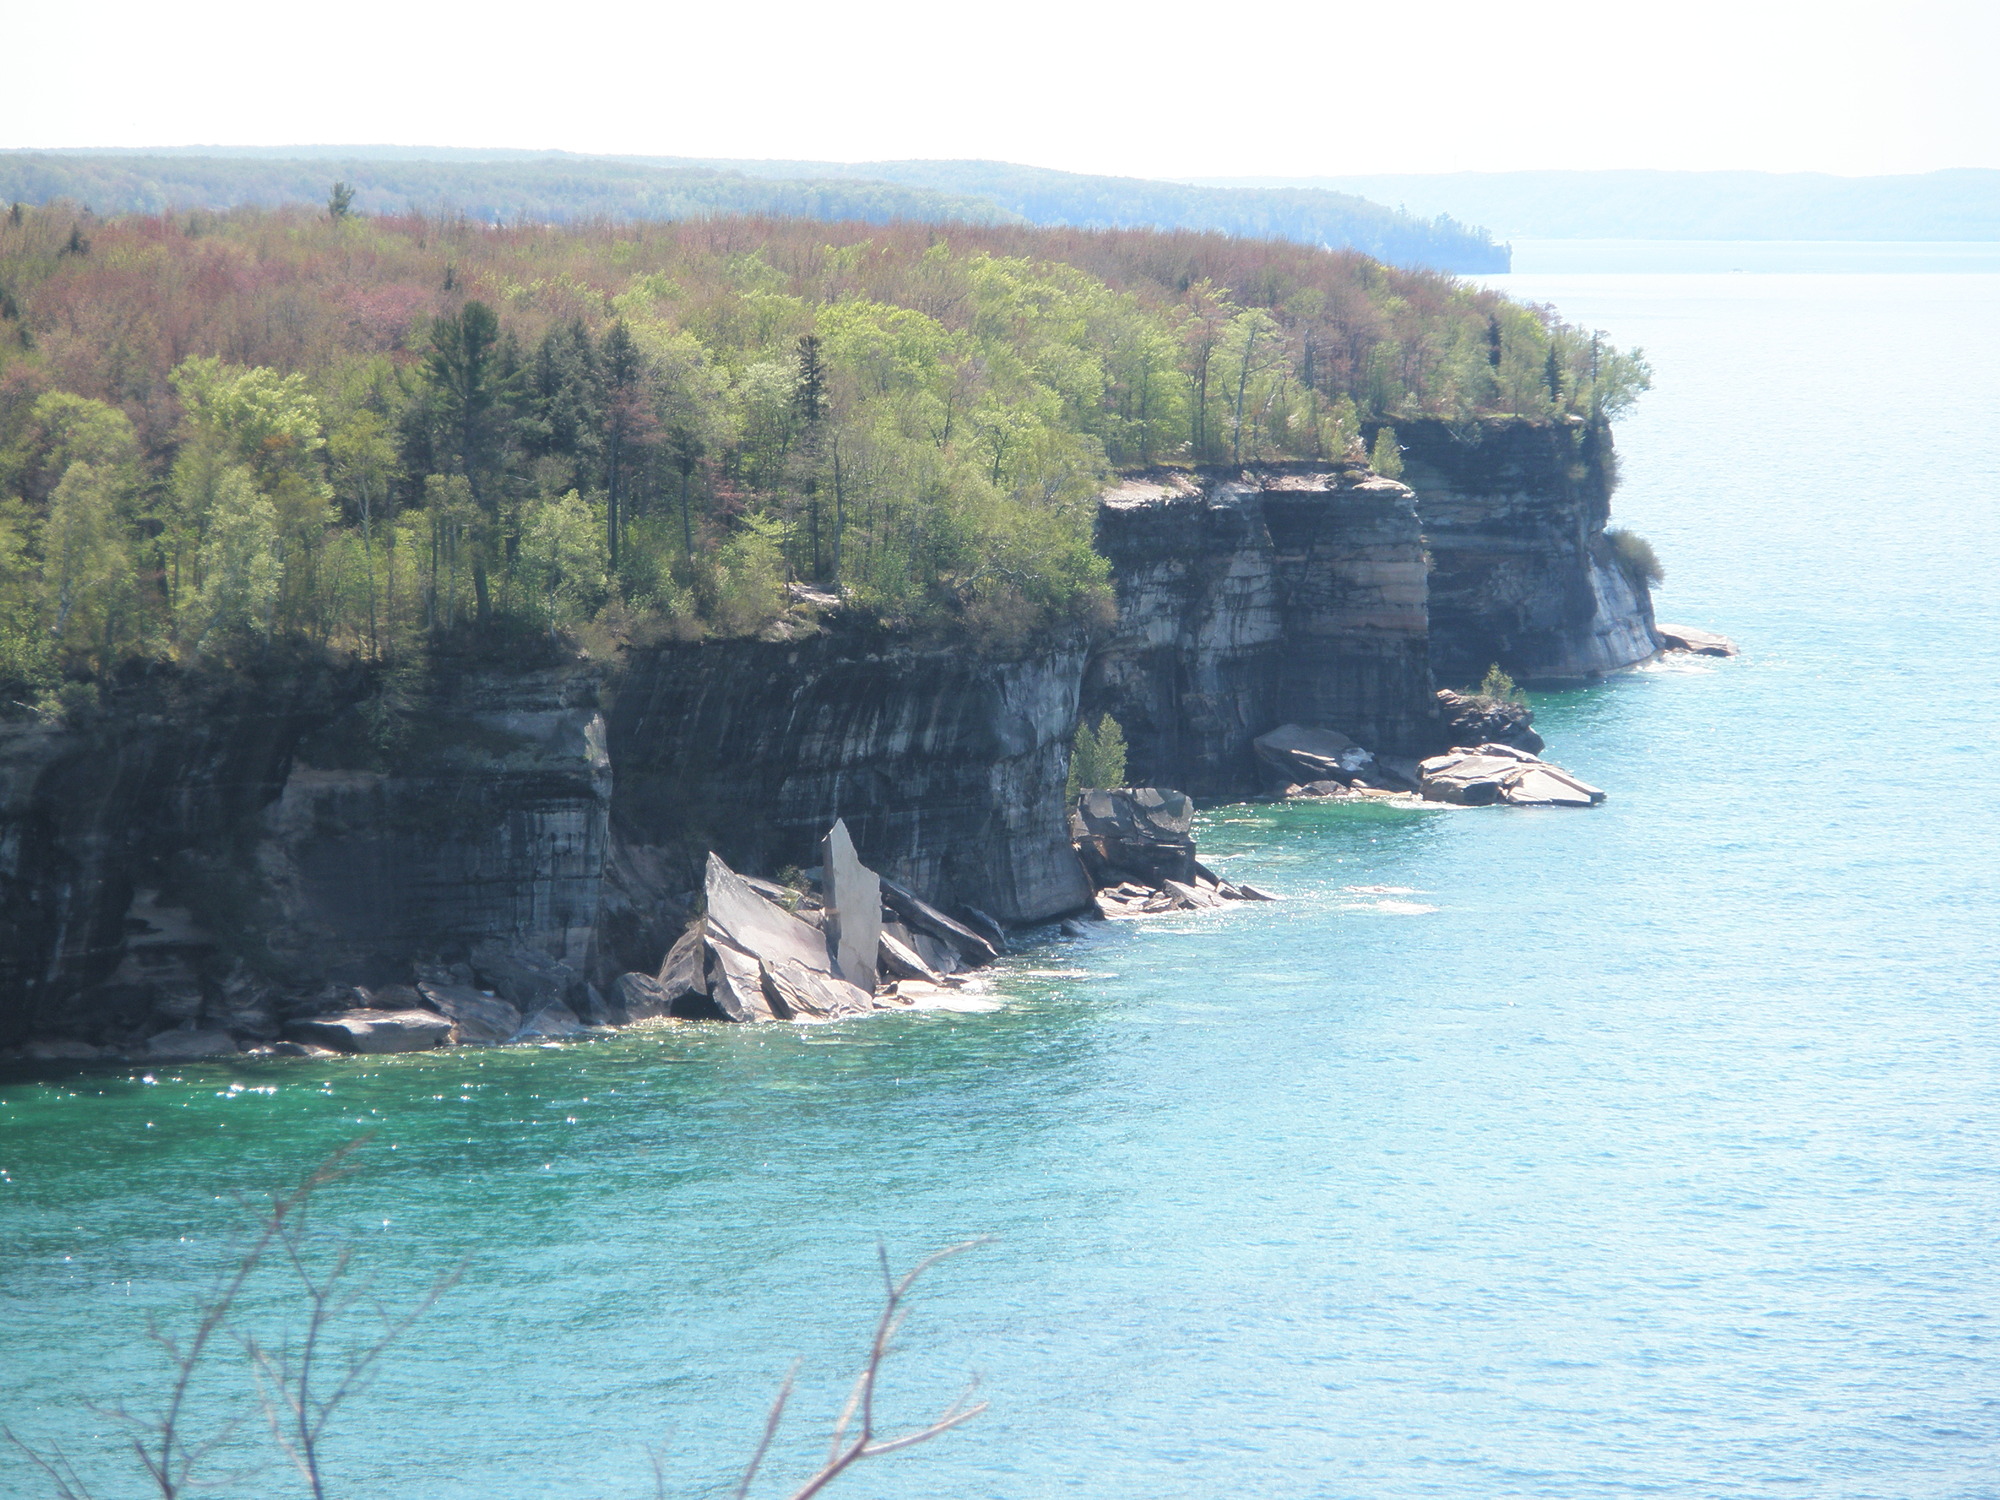 Black-streaked cliffs rise out of Lake Superior. Broken cliff sections sit at the base. Trees are growing on top.